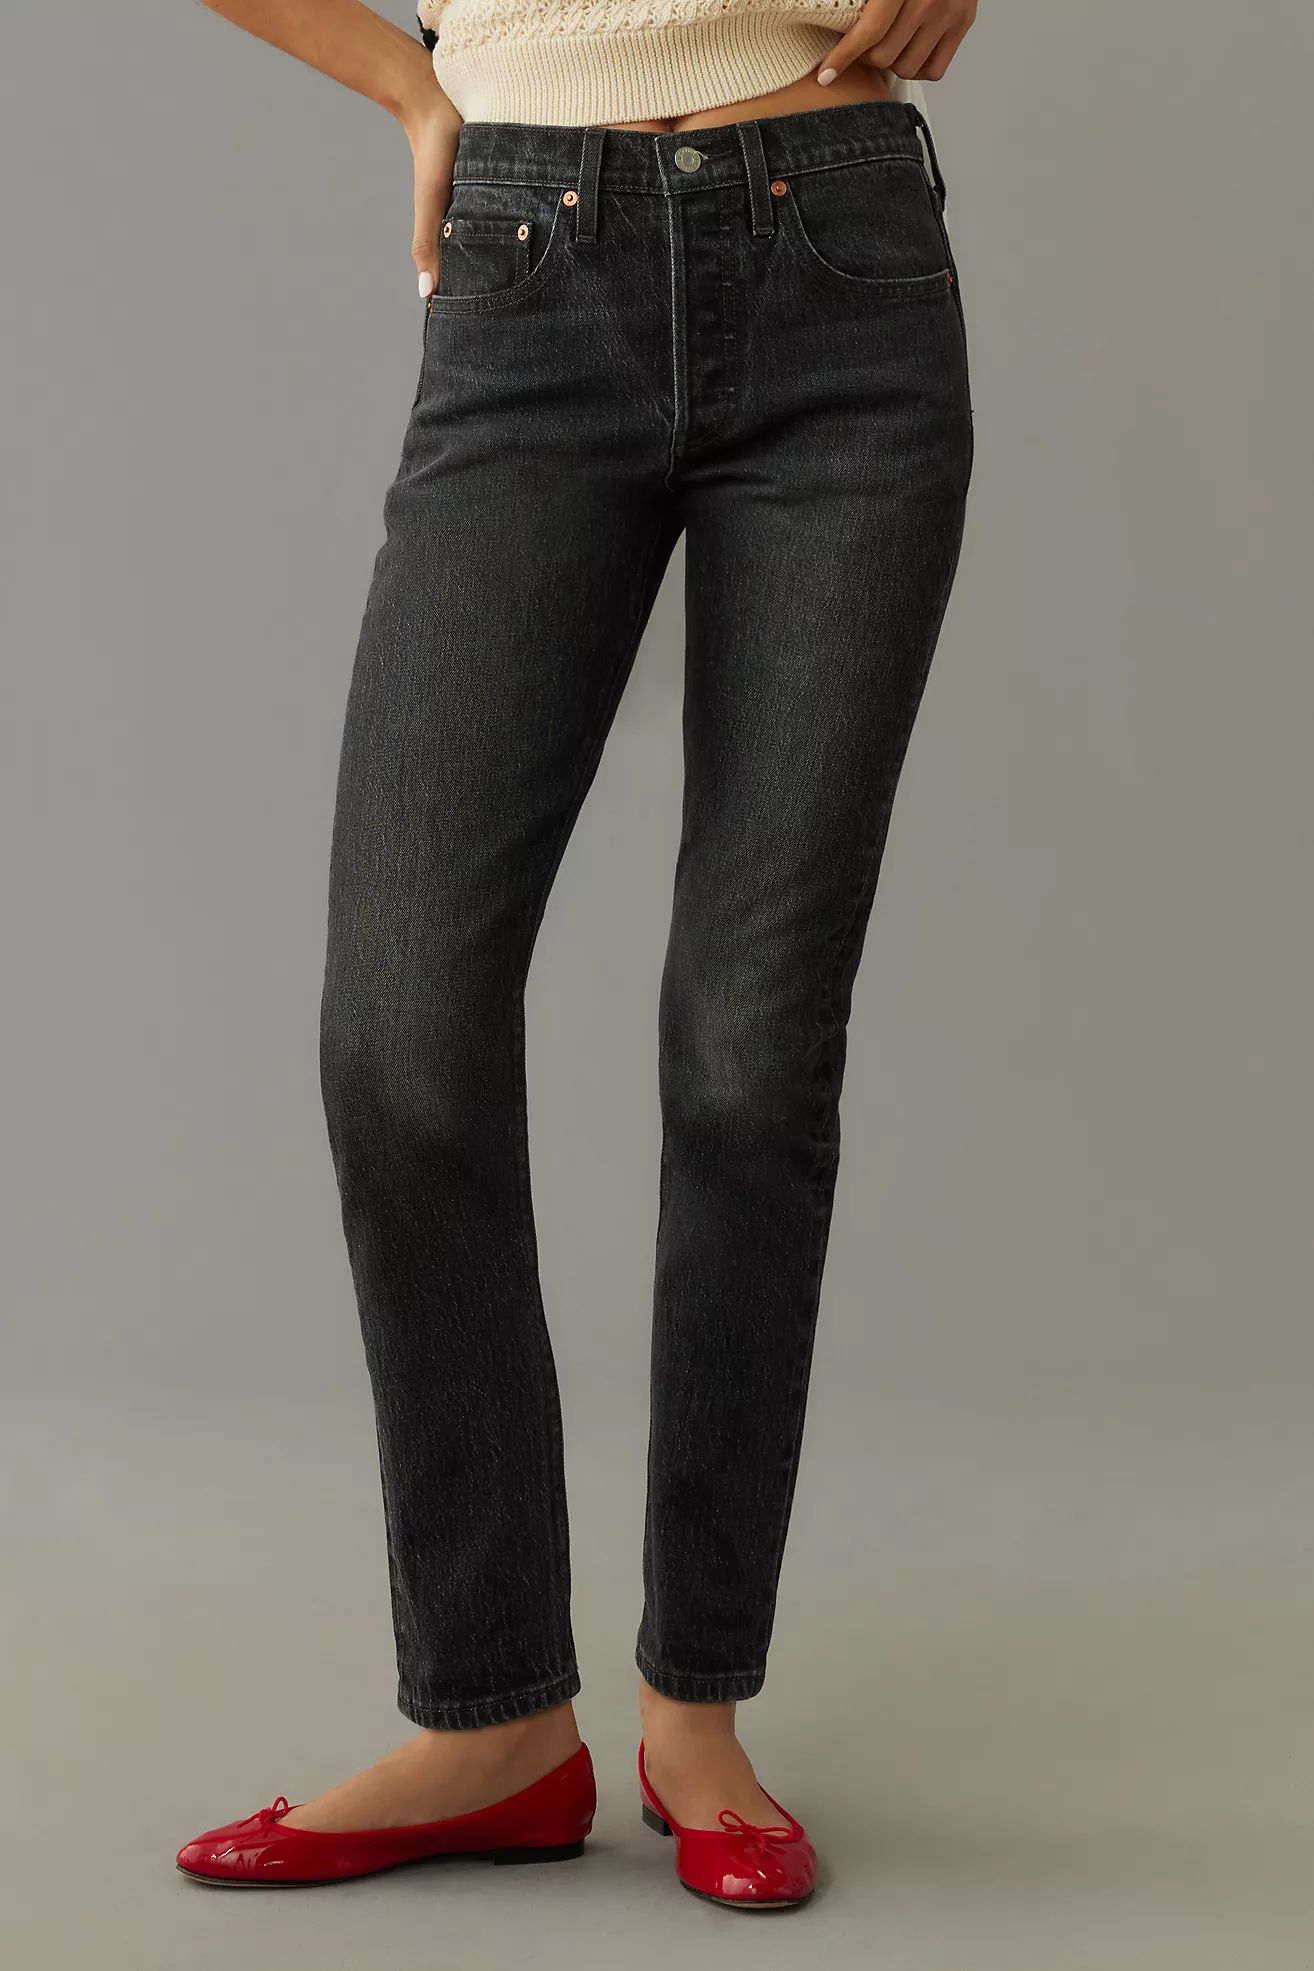 Levi's 501 High-Rise Skinny Jeans | Anthropologie (US)